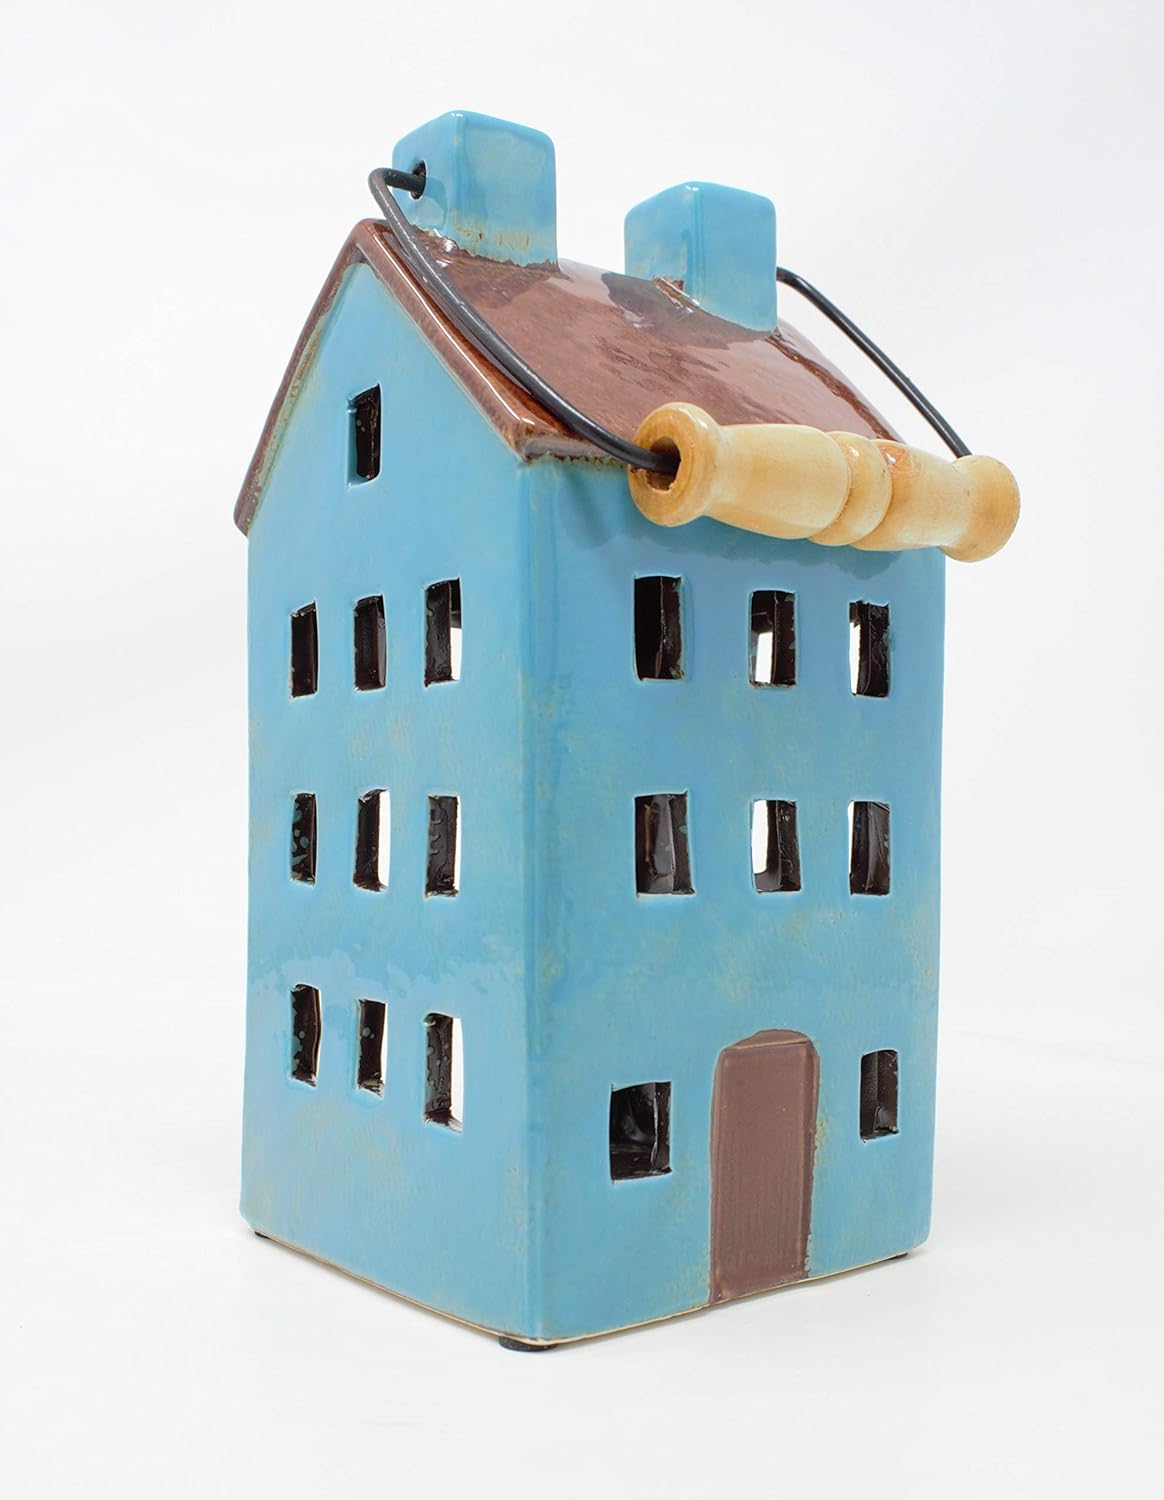 Ceramic Turquoise and Brown Village Cottage House Home Pottery Candle Tea light Candle Holder Ornament